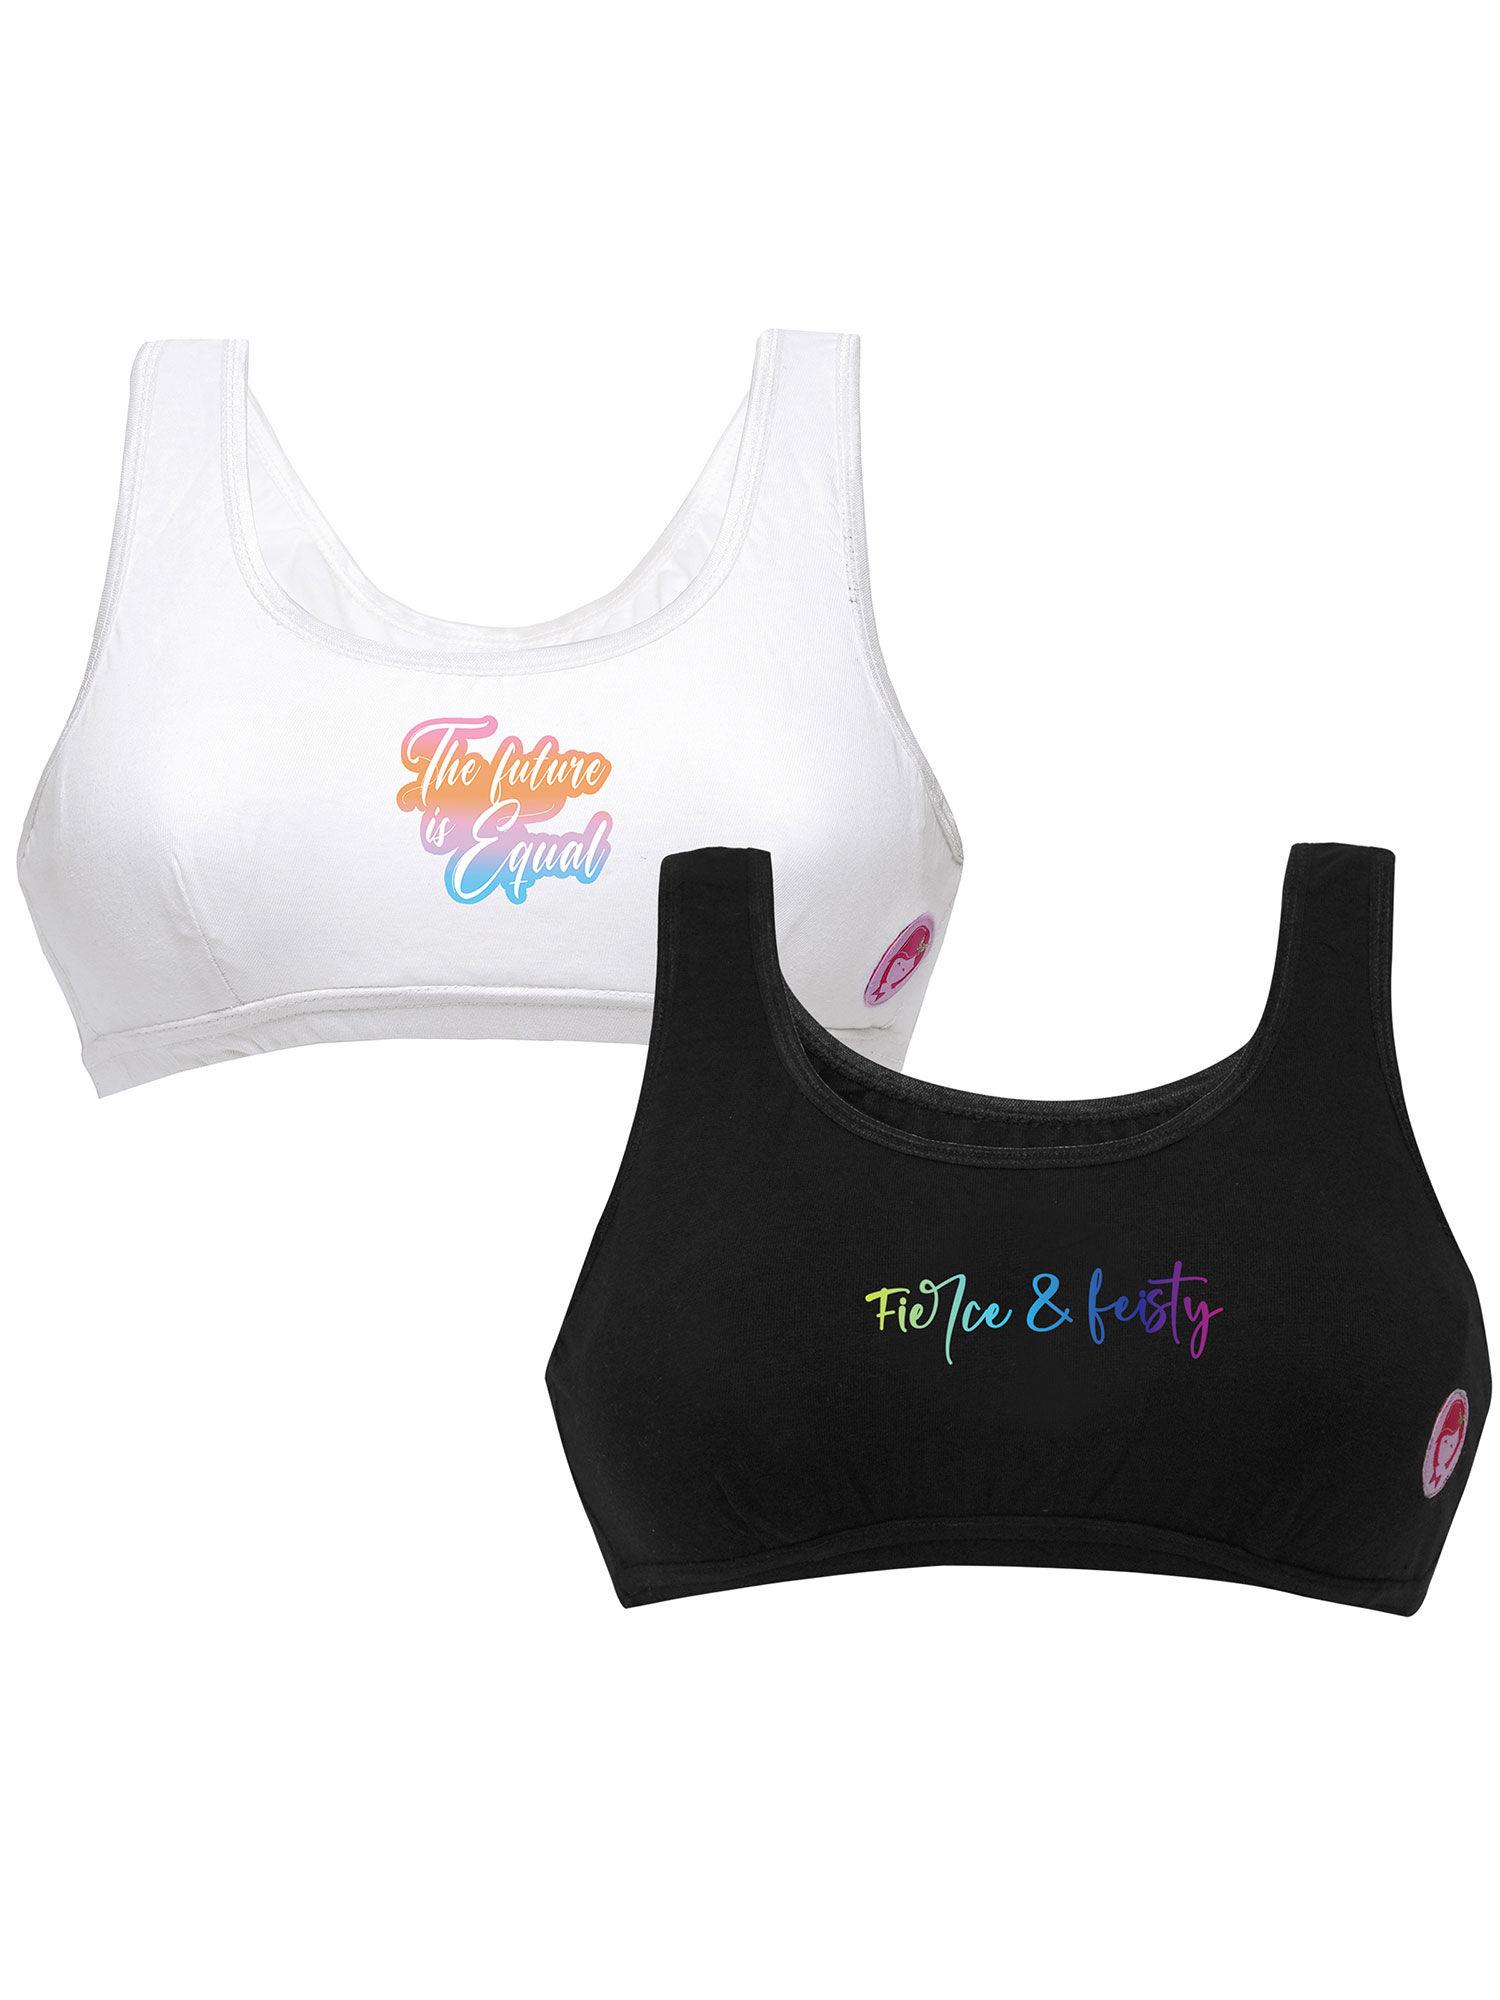 be-you-collection-joyful-beginners-double-front-layered-sports-bras-(set-of-2)